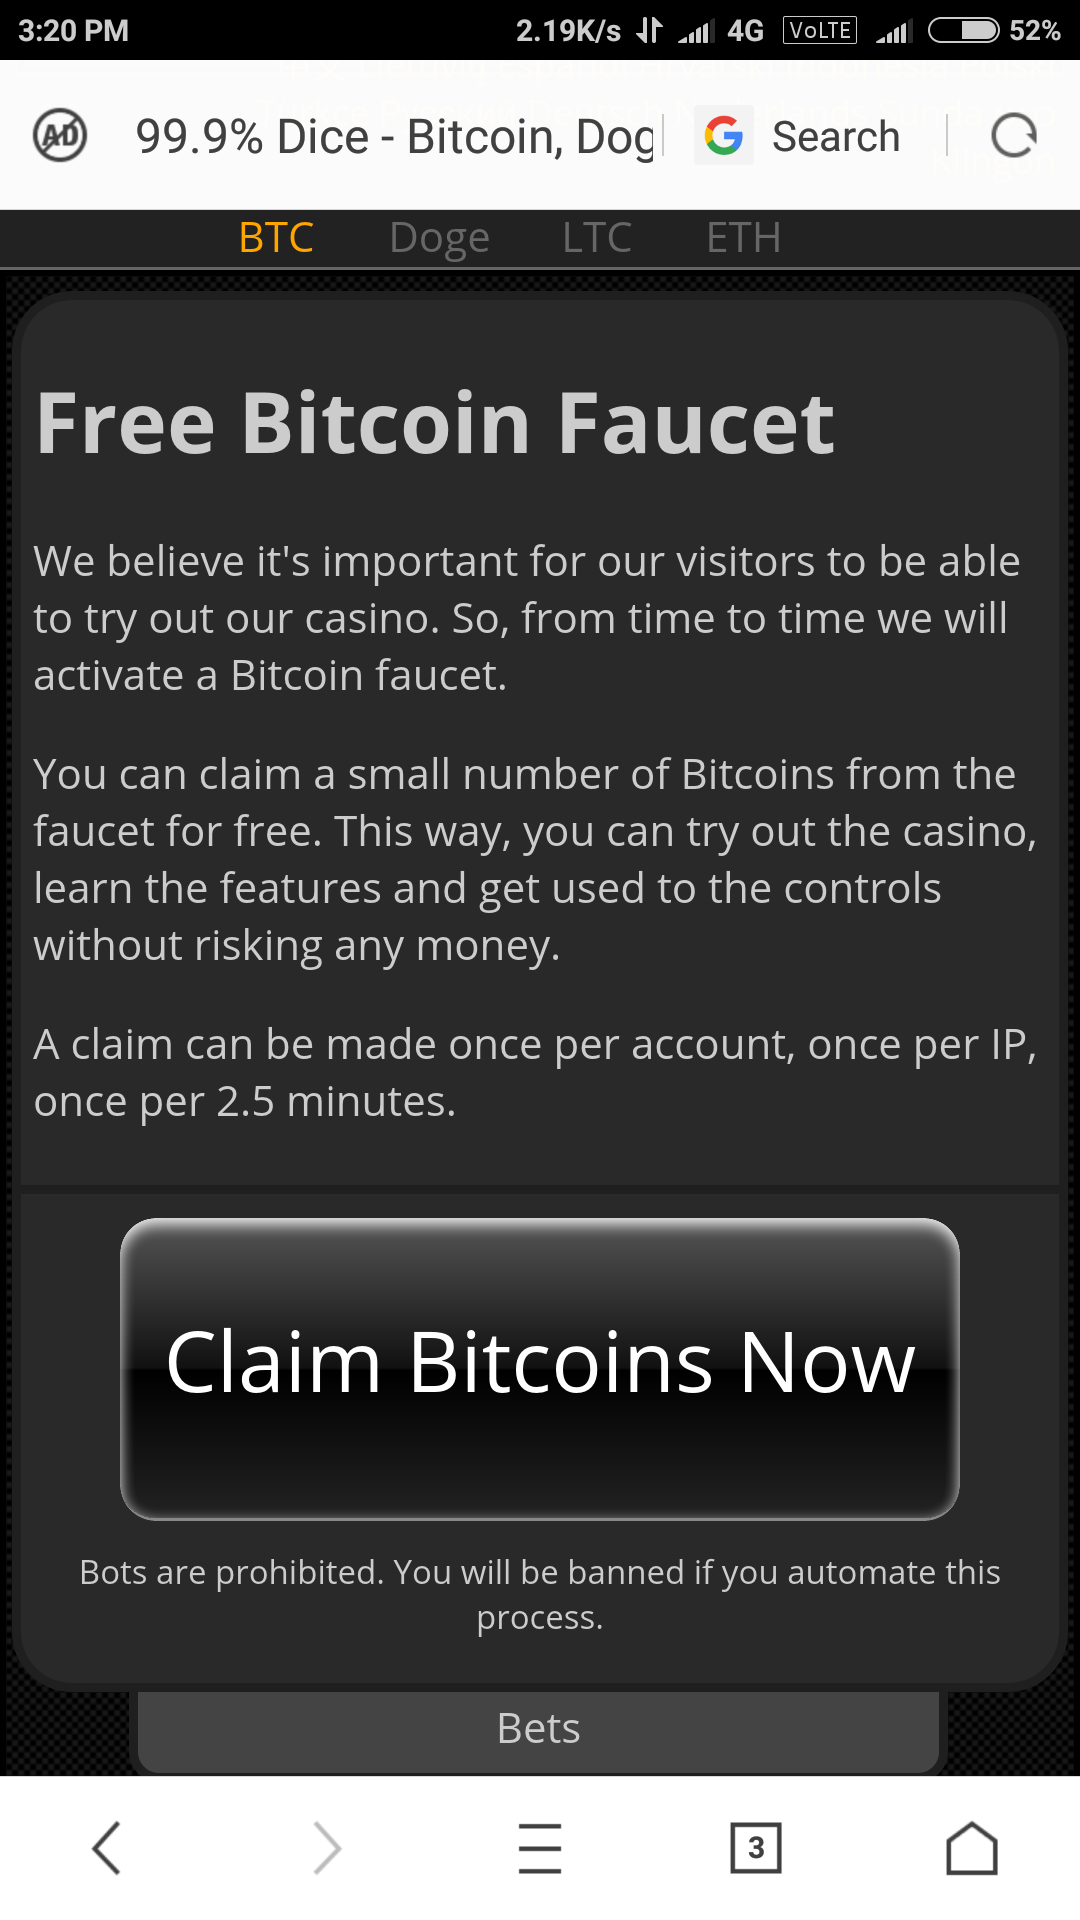 How To Earn Free Bitcoin Other Crypto With 999dice Site Earn - 